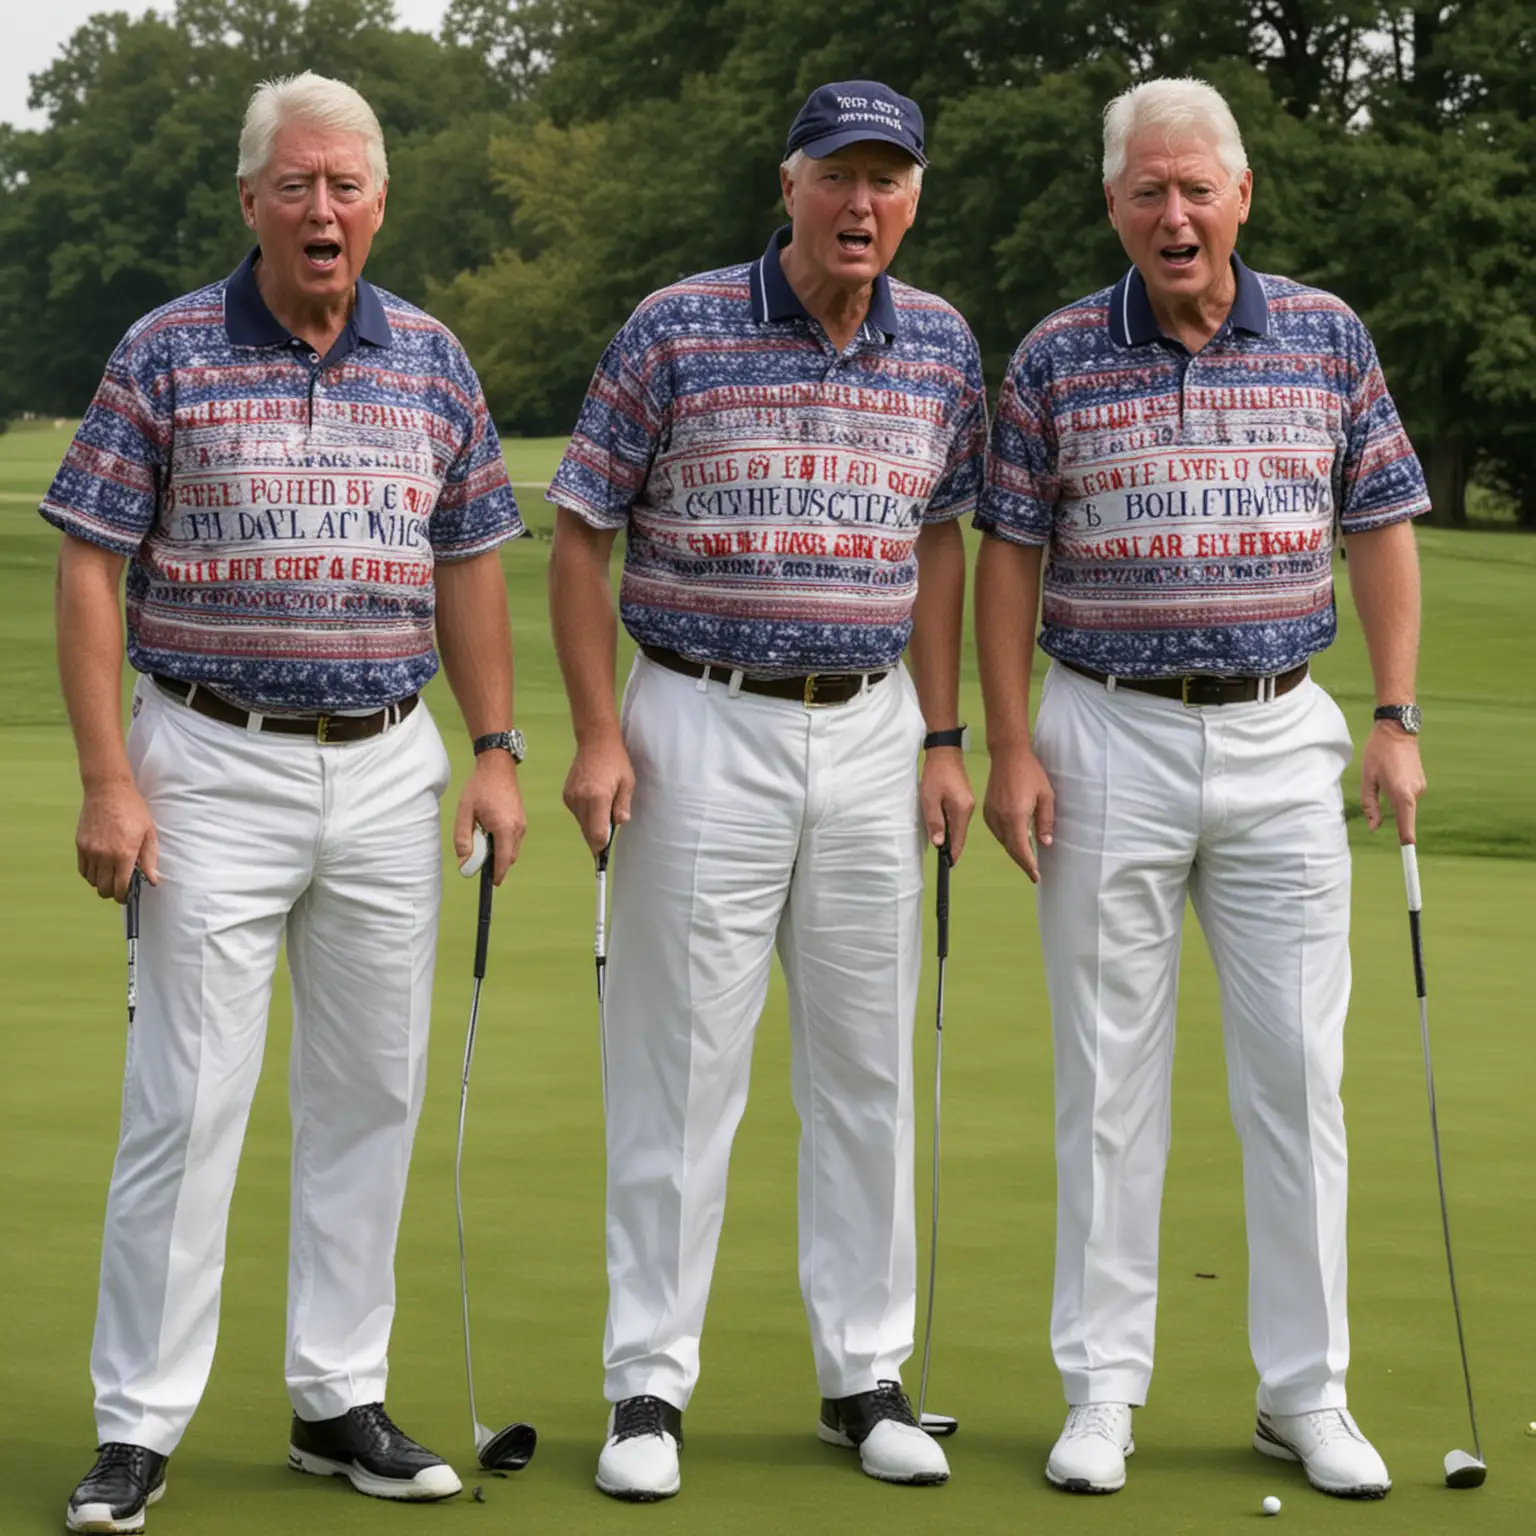 Identical Twins Golfing Trump Clinton and Prince Andrew in Diverse Shirts